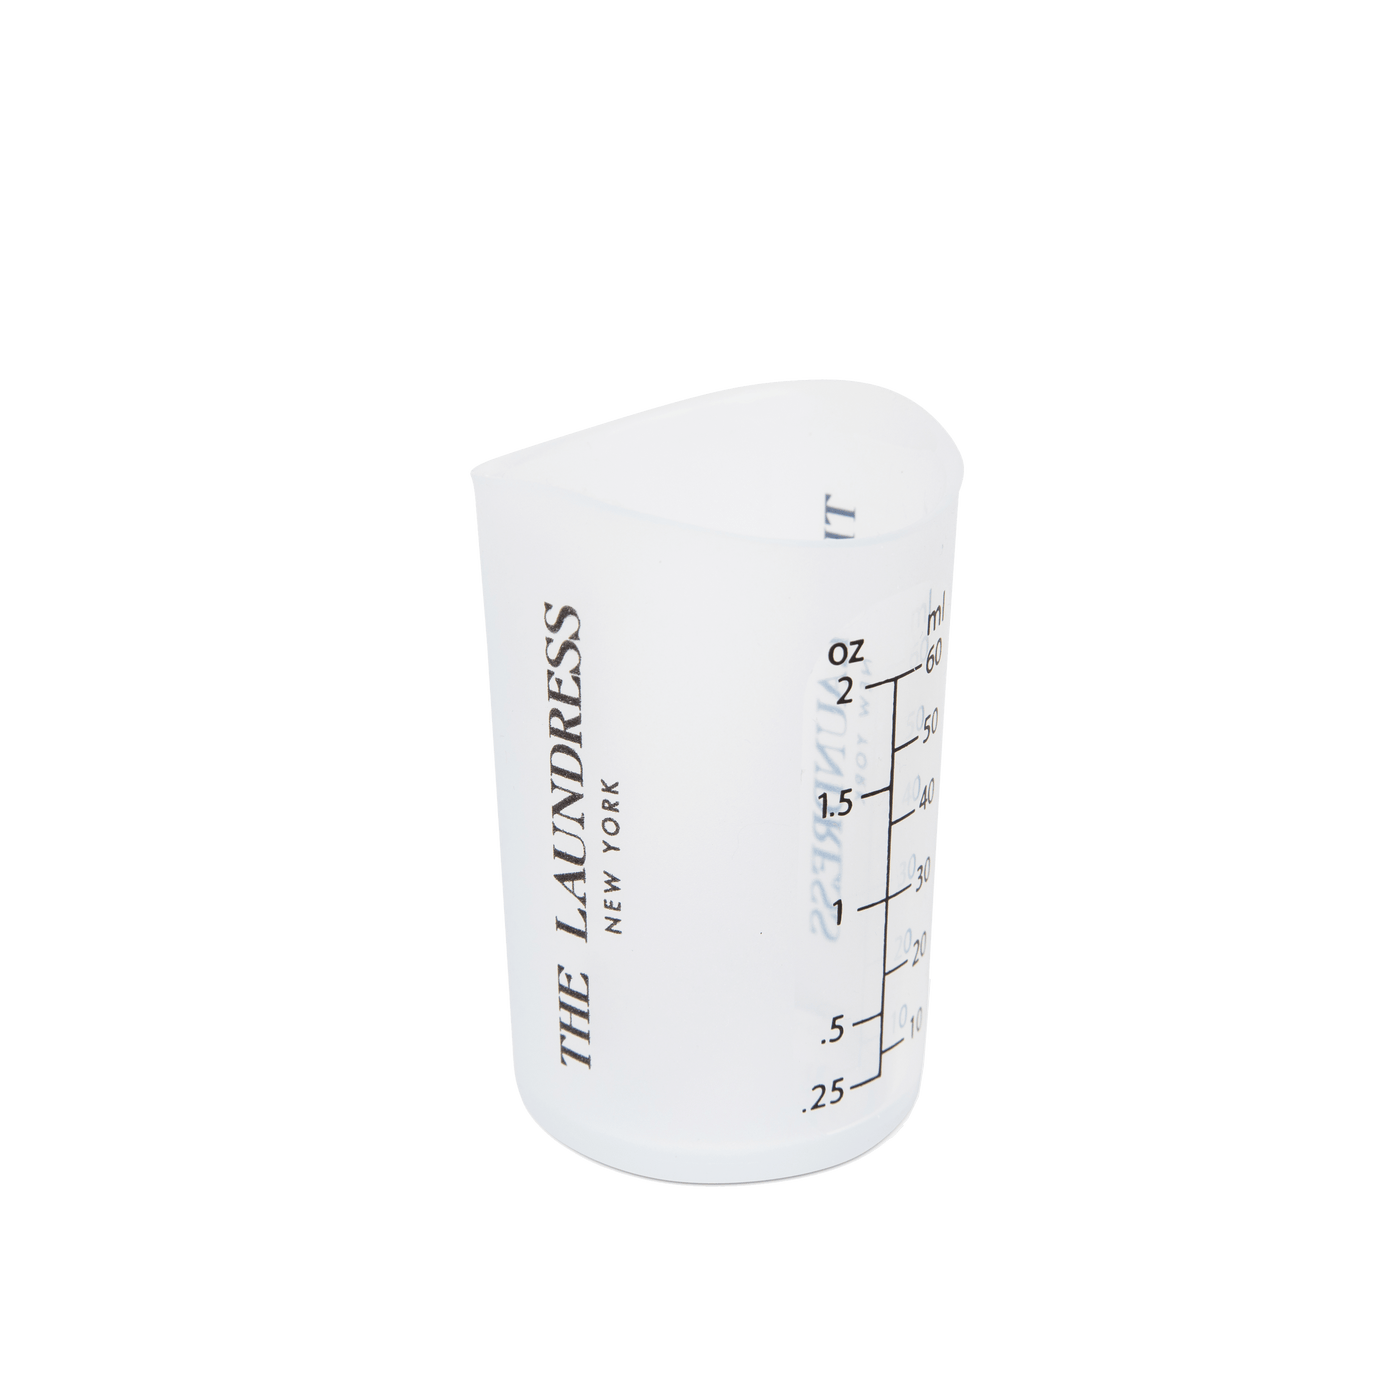 Laundry Measuring Cup Household Supplies The Laundress